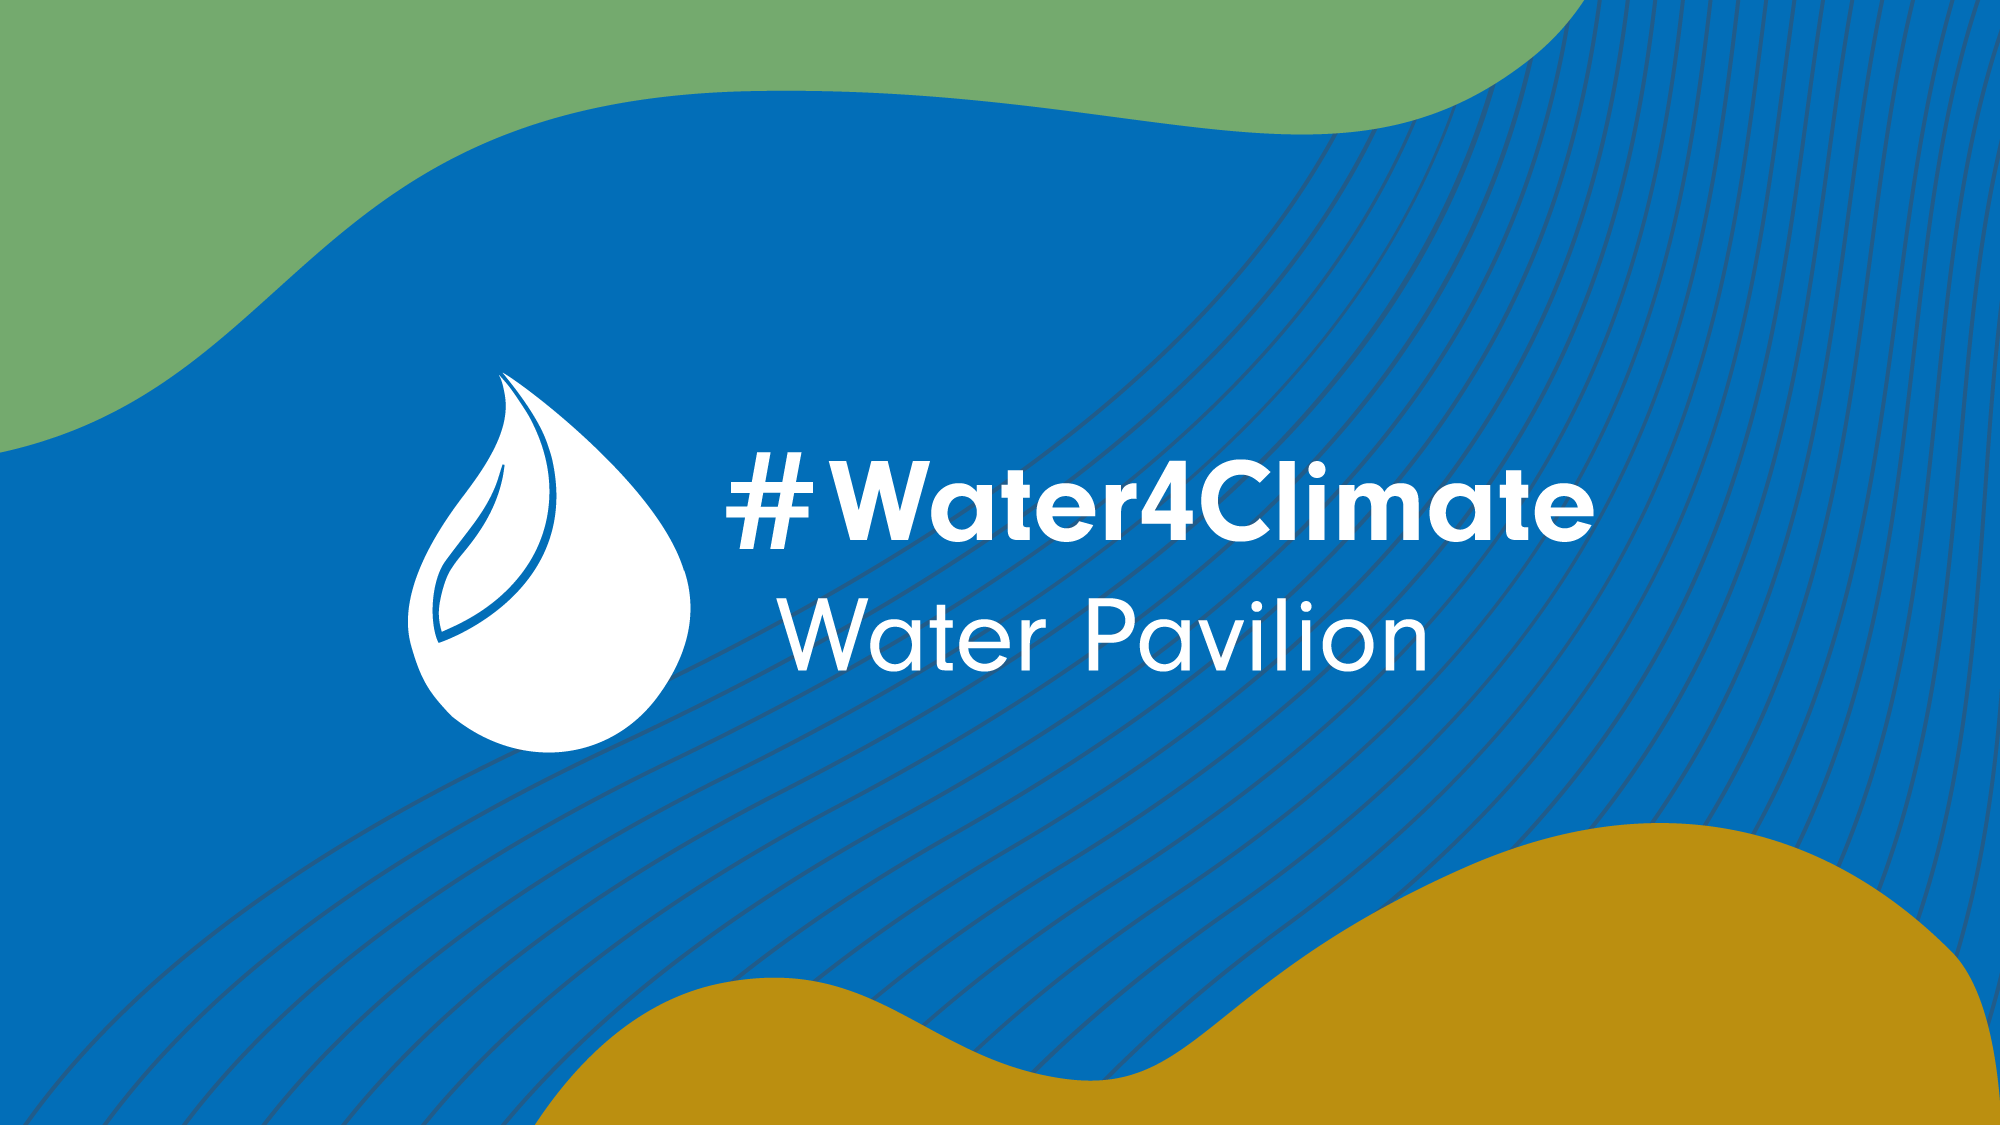 White Text: #Water4Climate, Water Pavilion on blue background with green and mustard shapes in the corner